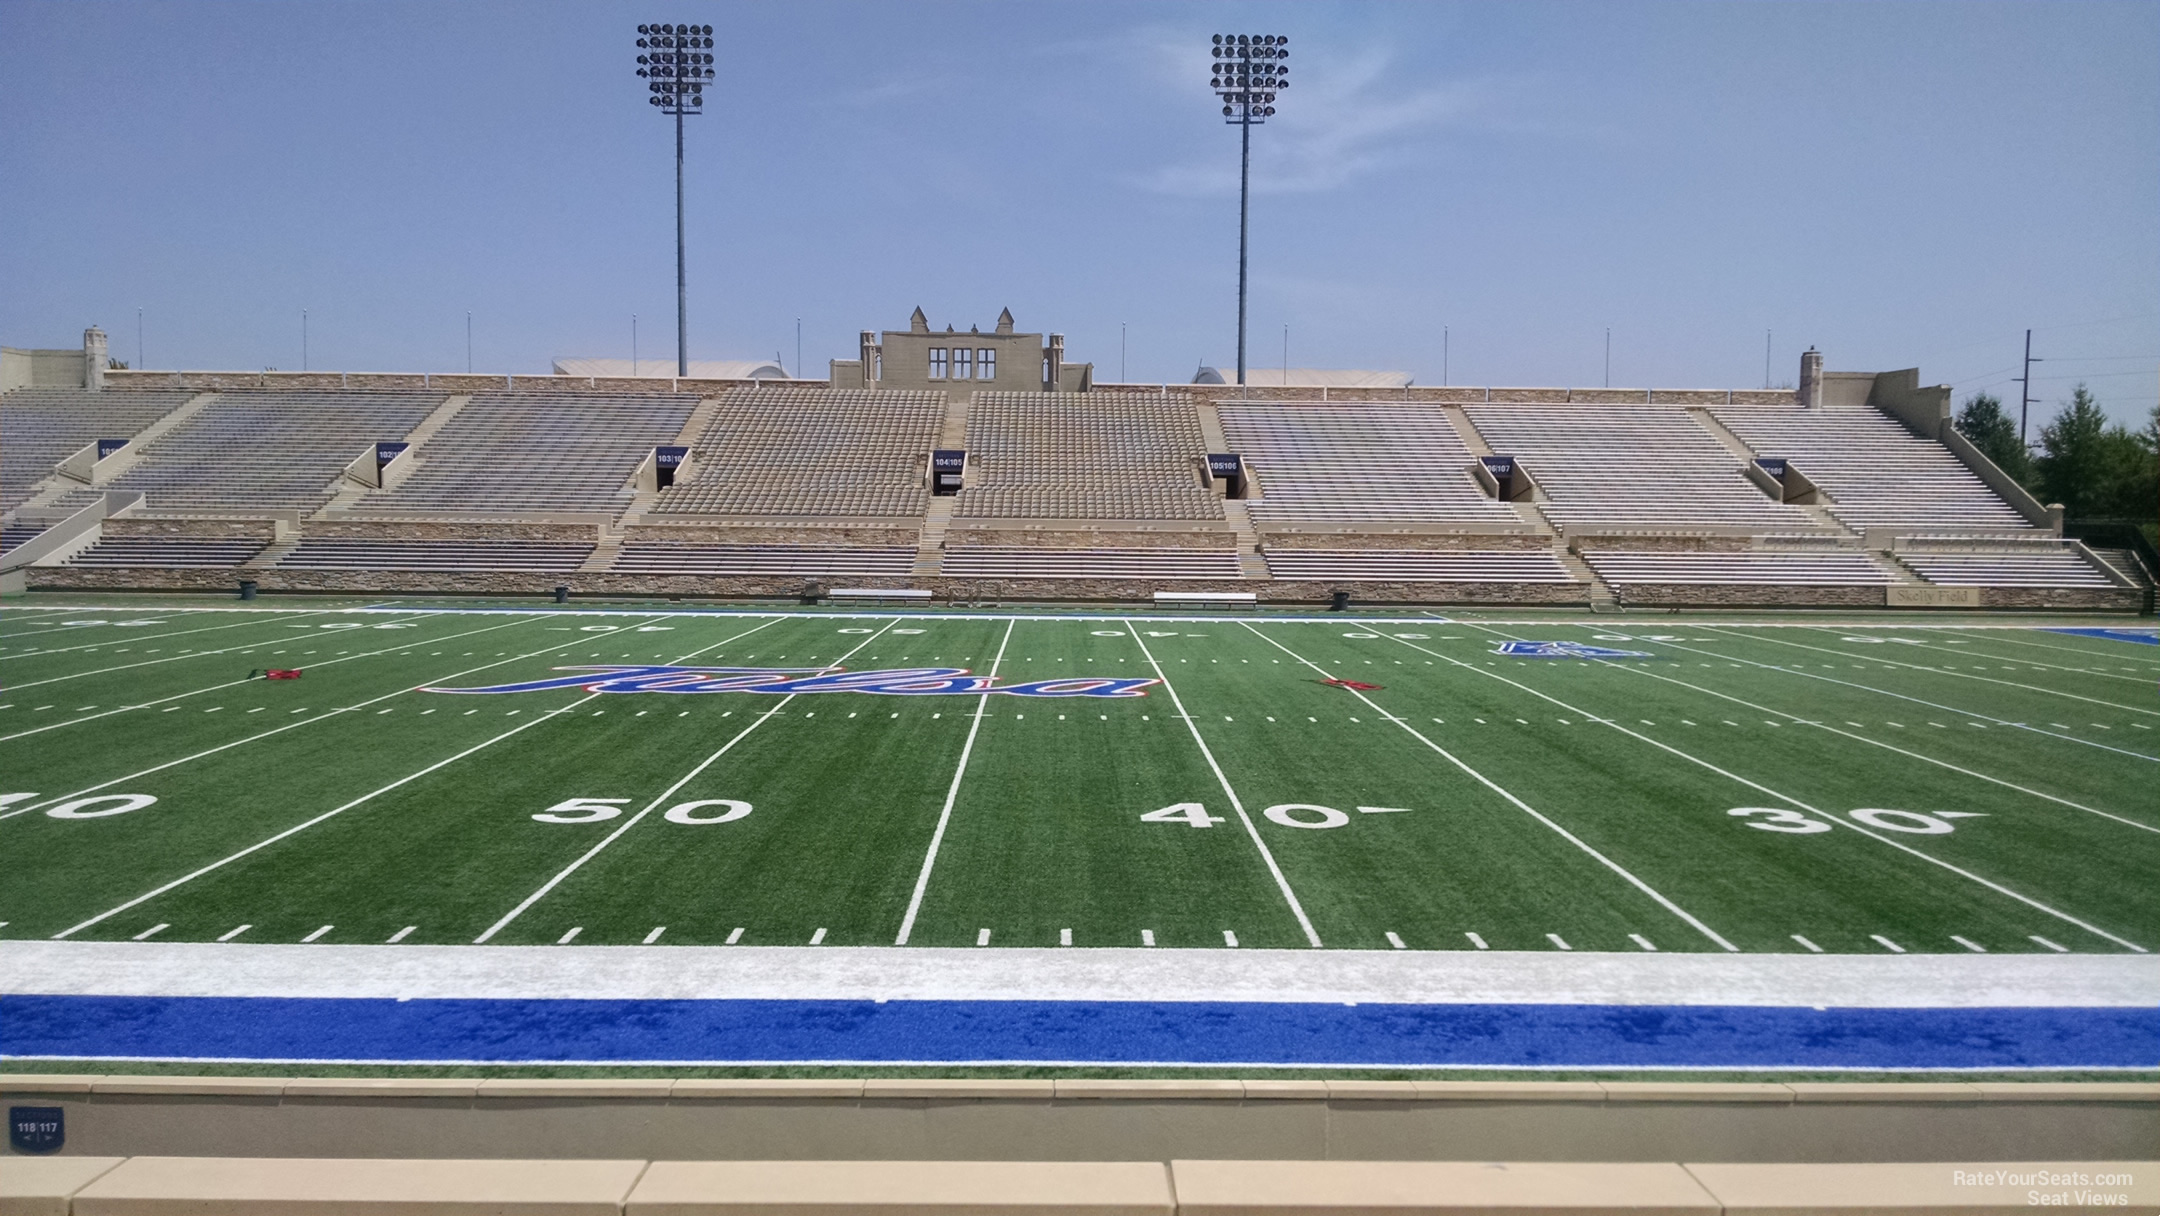 section 117, row 15 seat view  - h.a. chapman stadium